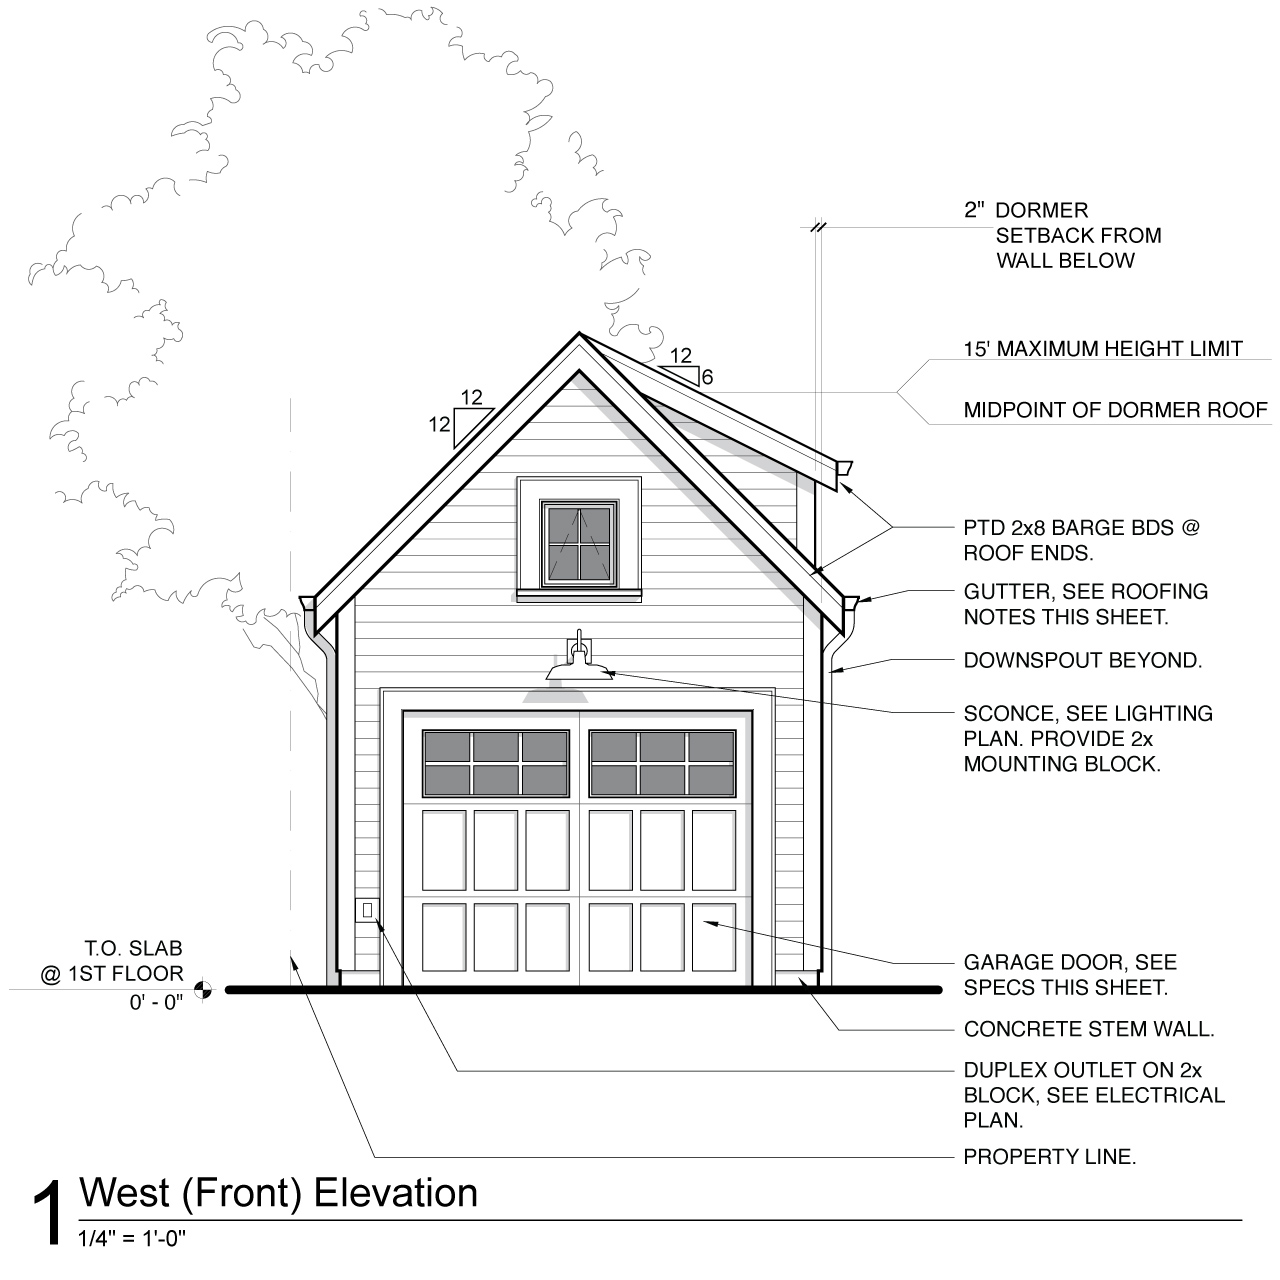 Architectural drawing of the front elevation of the detached garage.